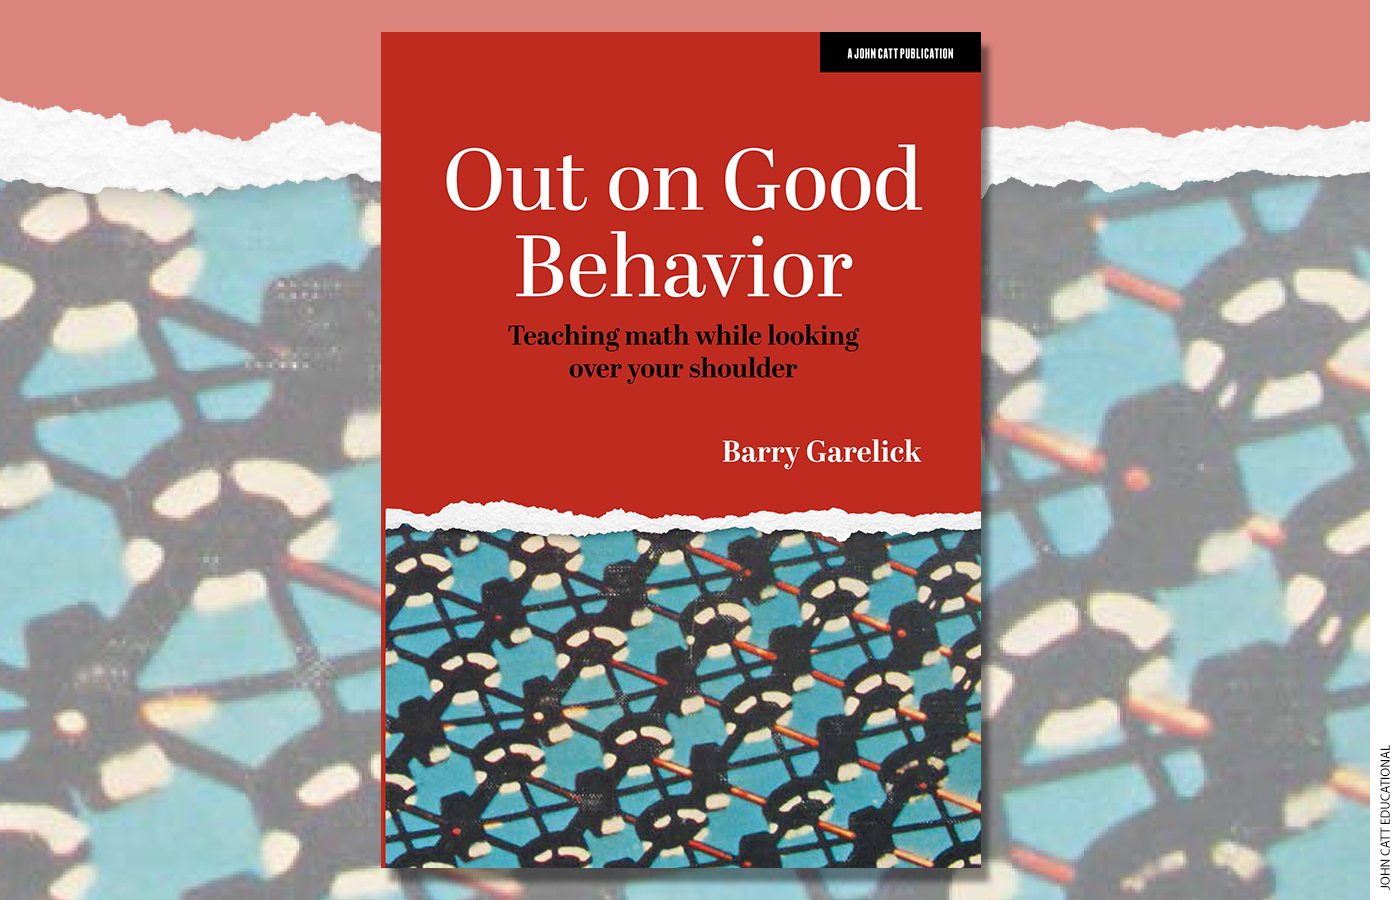 Cover of Out on Good Behavior by Barry Garelick